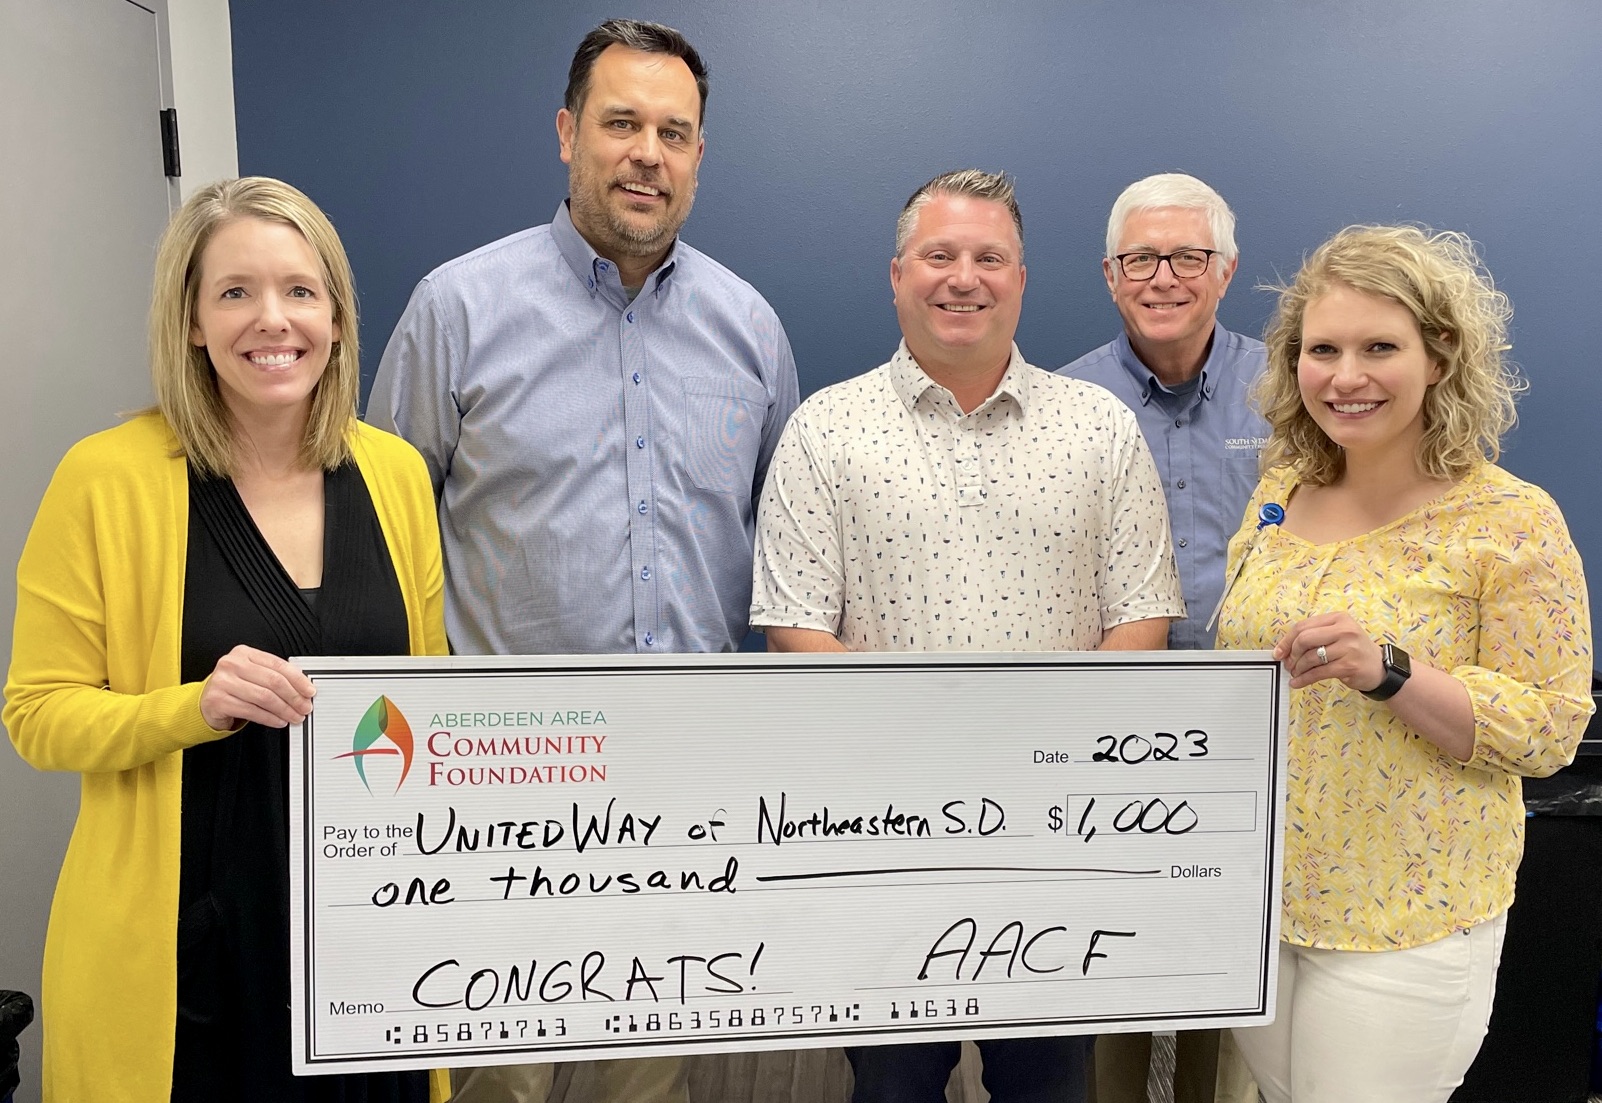 The Aberdeen Area Community Foundation is pleased to support United Way of Northeastern South Dakota with a grant to assist in furnishing its new office space. The Aberdeen Area Community Foundation recently made the ceremonial check presentation at a United Way board meeting. Making the presentation were, from left, Aberdeen Area Community Foundation board member Hannah Walters, United Way Executive Director Aaron Schultz, Aberdeen Area Community Foundation board Chairman Heath Johnson, Aberdeen Area Community Foundation Executive Director Pat Gallagher and Aberdeen Area Community Foundation board member Bea Smith. Photo courtesy of Aberdeen Area Community Foundation